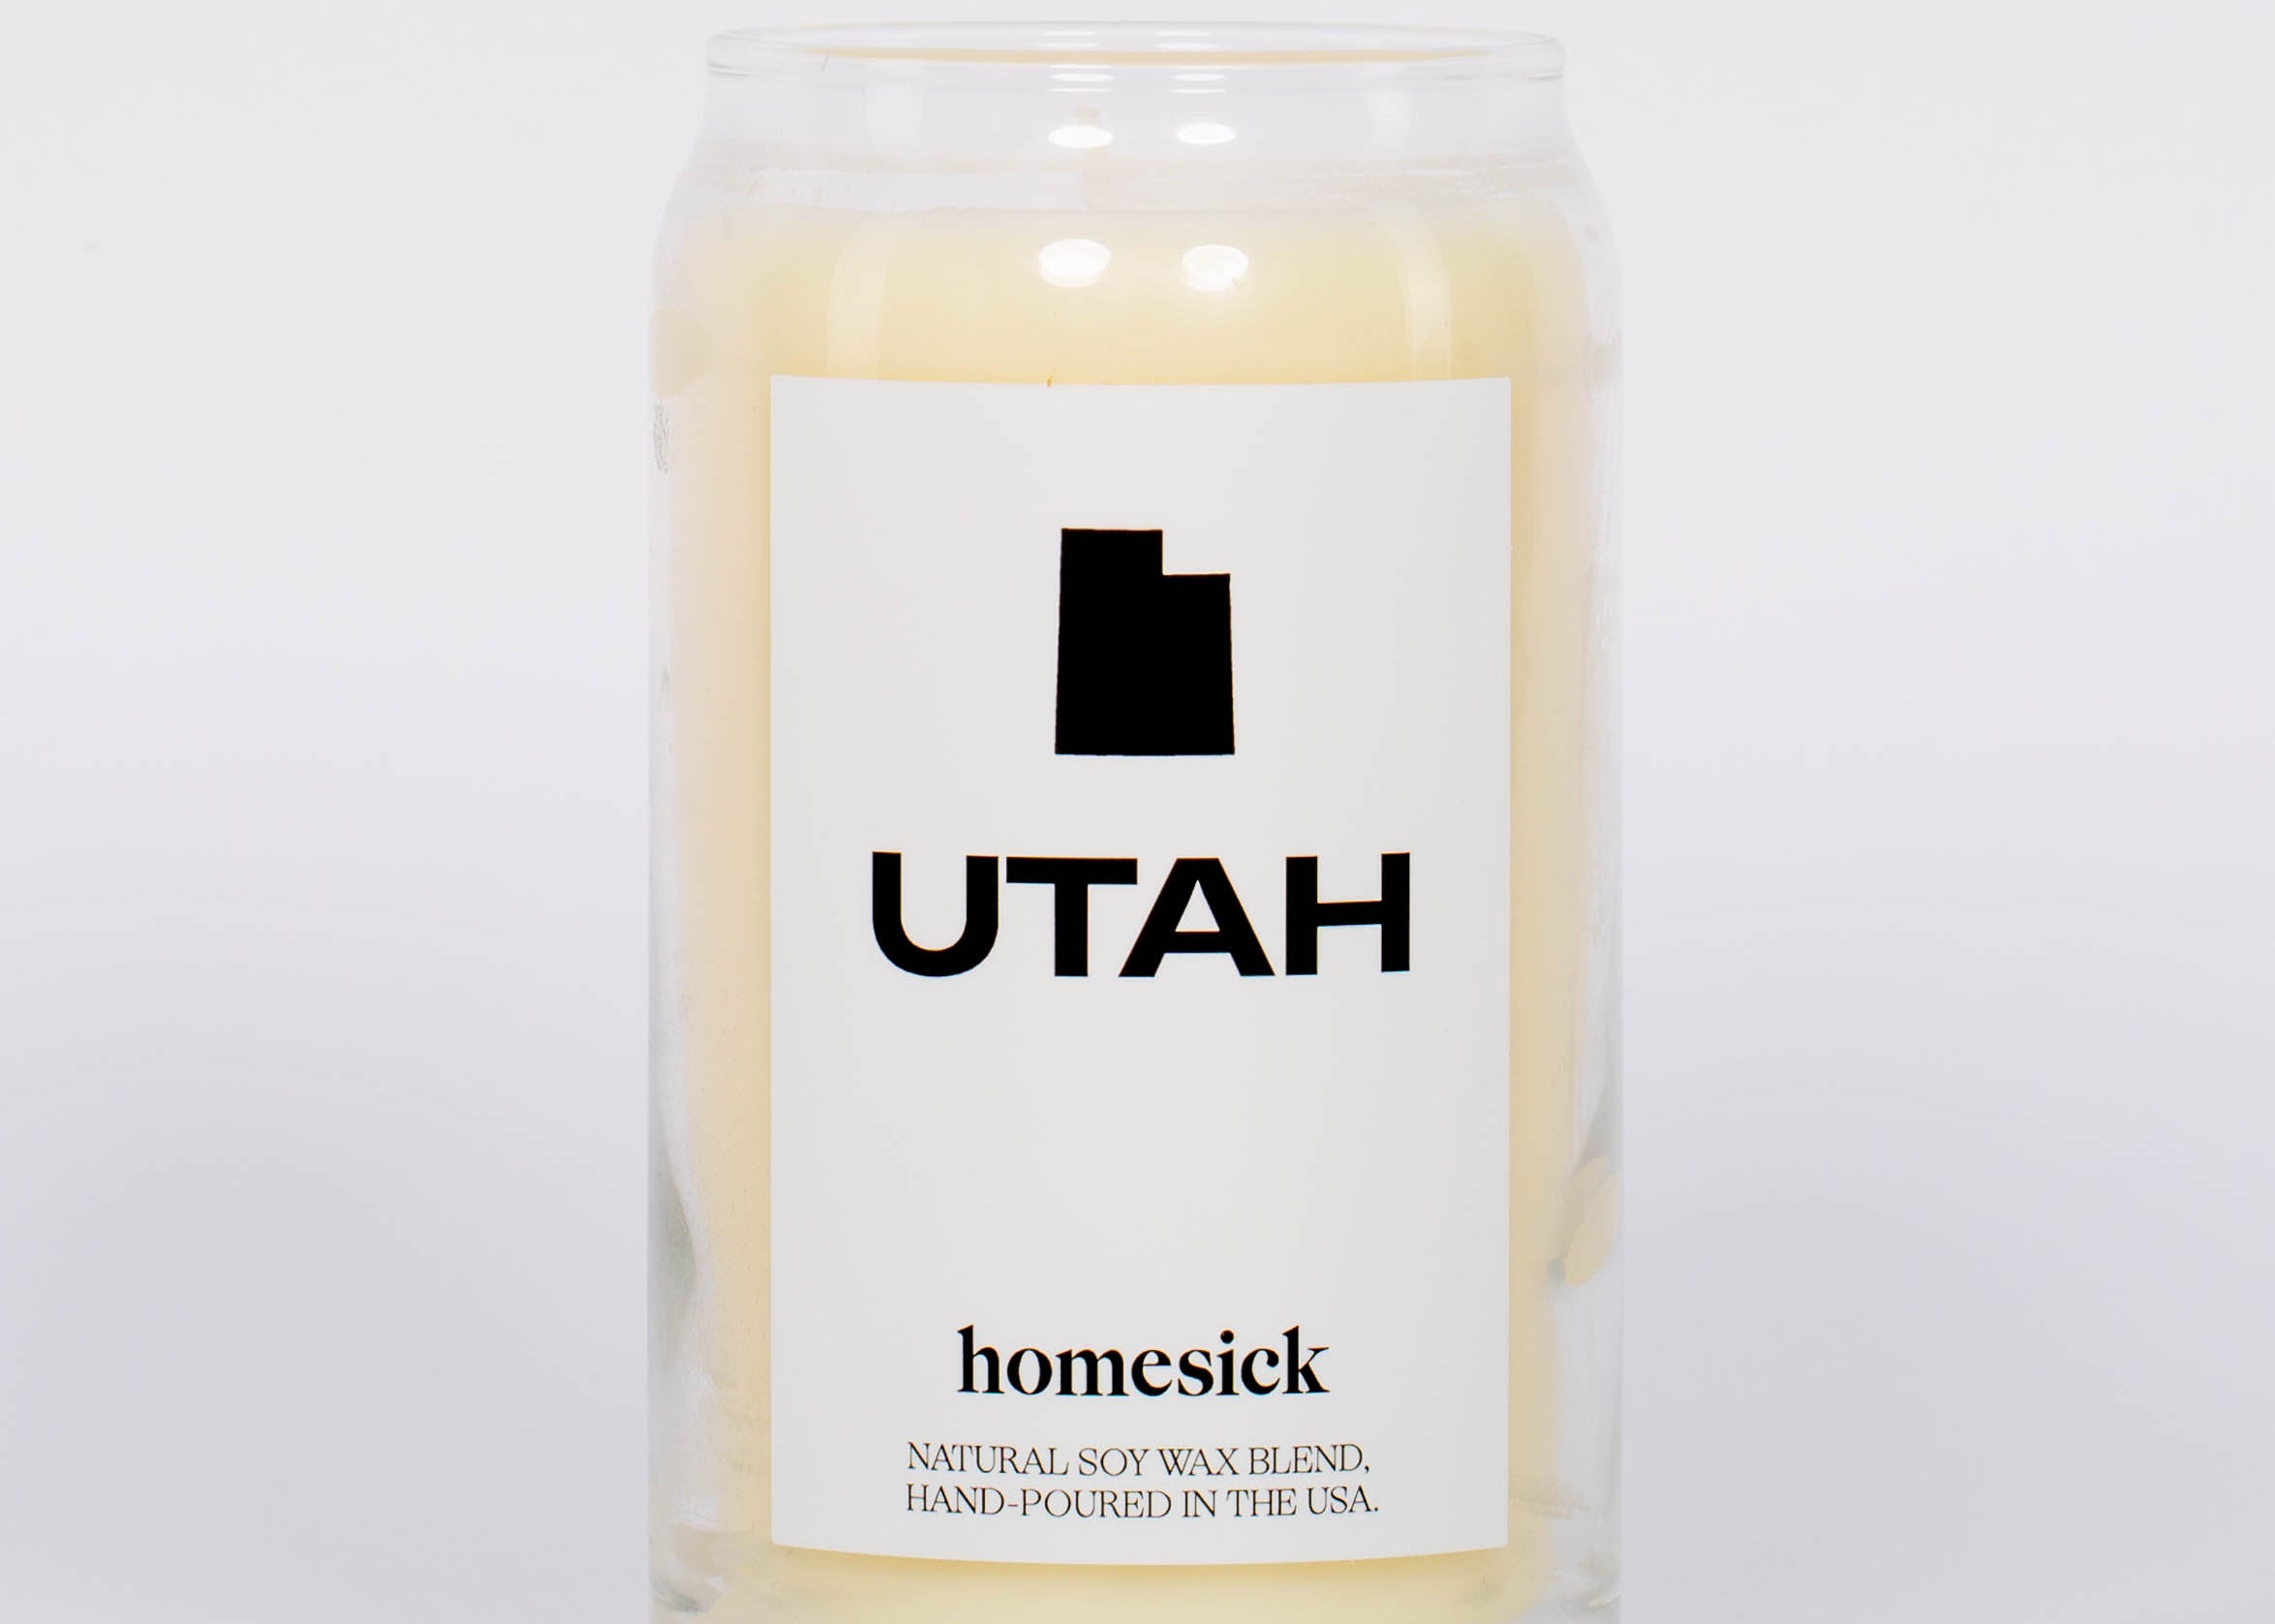 Cream soy wax hand poured Utah Candle by Homesick in glass jar and label with Utah state outline. 